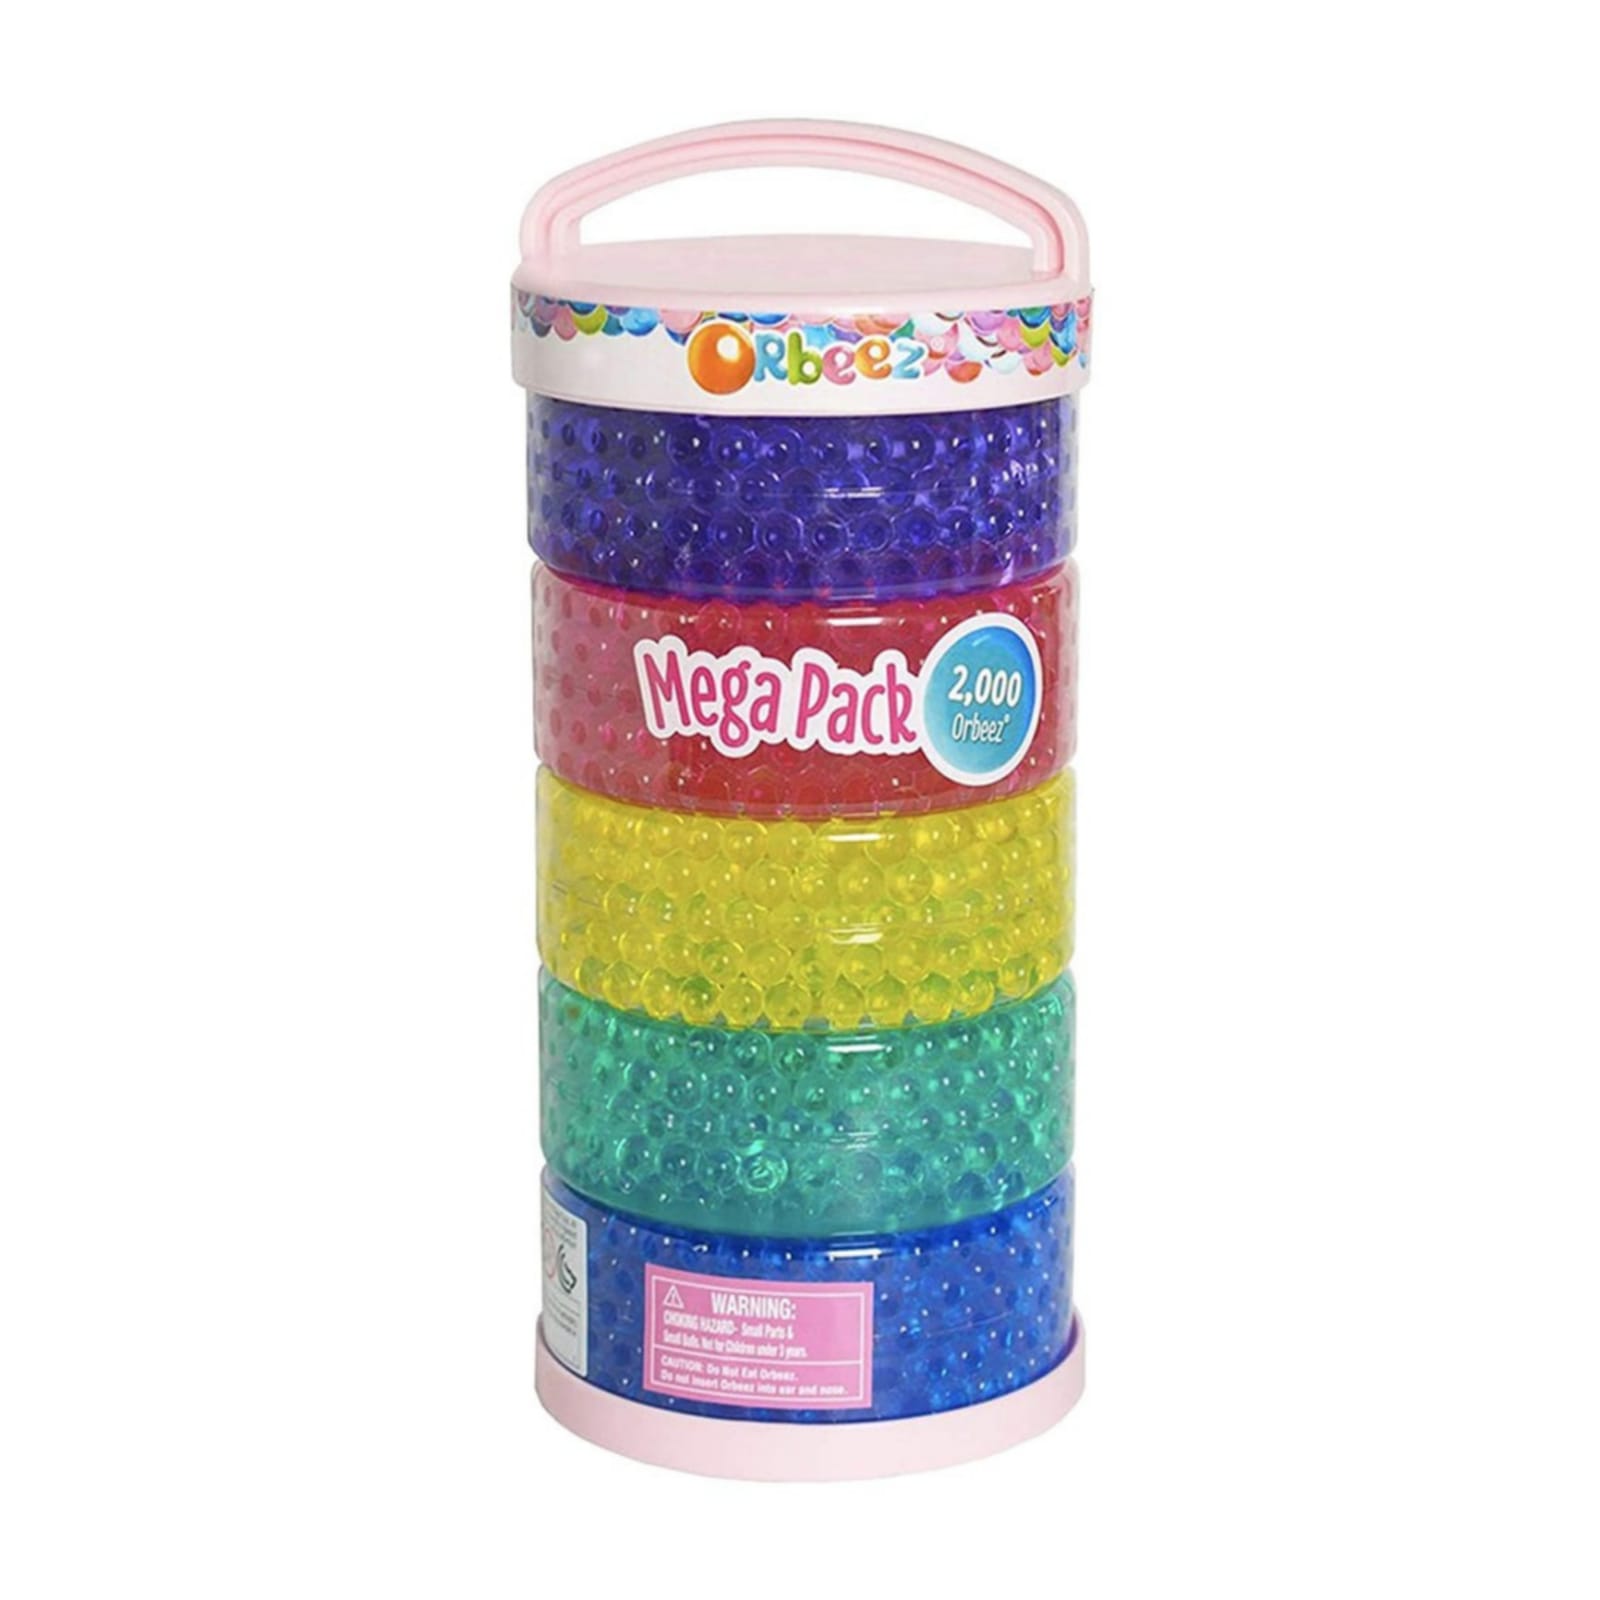 Orbeez - Grown Mega Pack 2000 Squishy Beads - 6061610 - Toys 4You Store